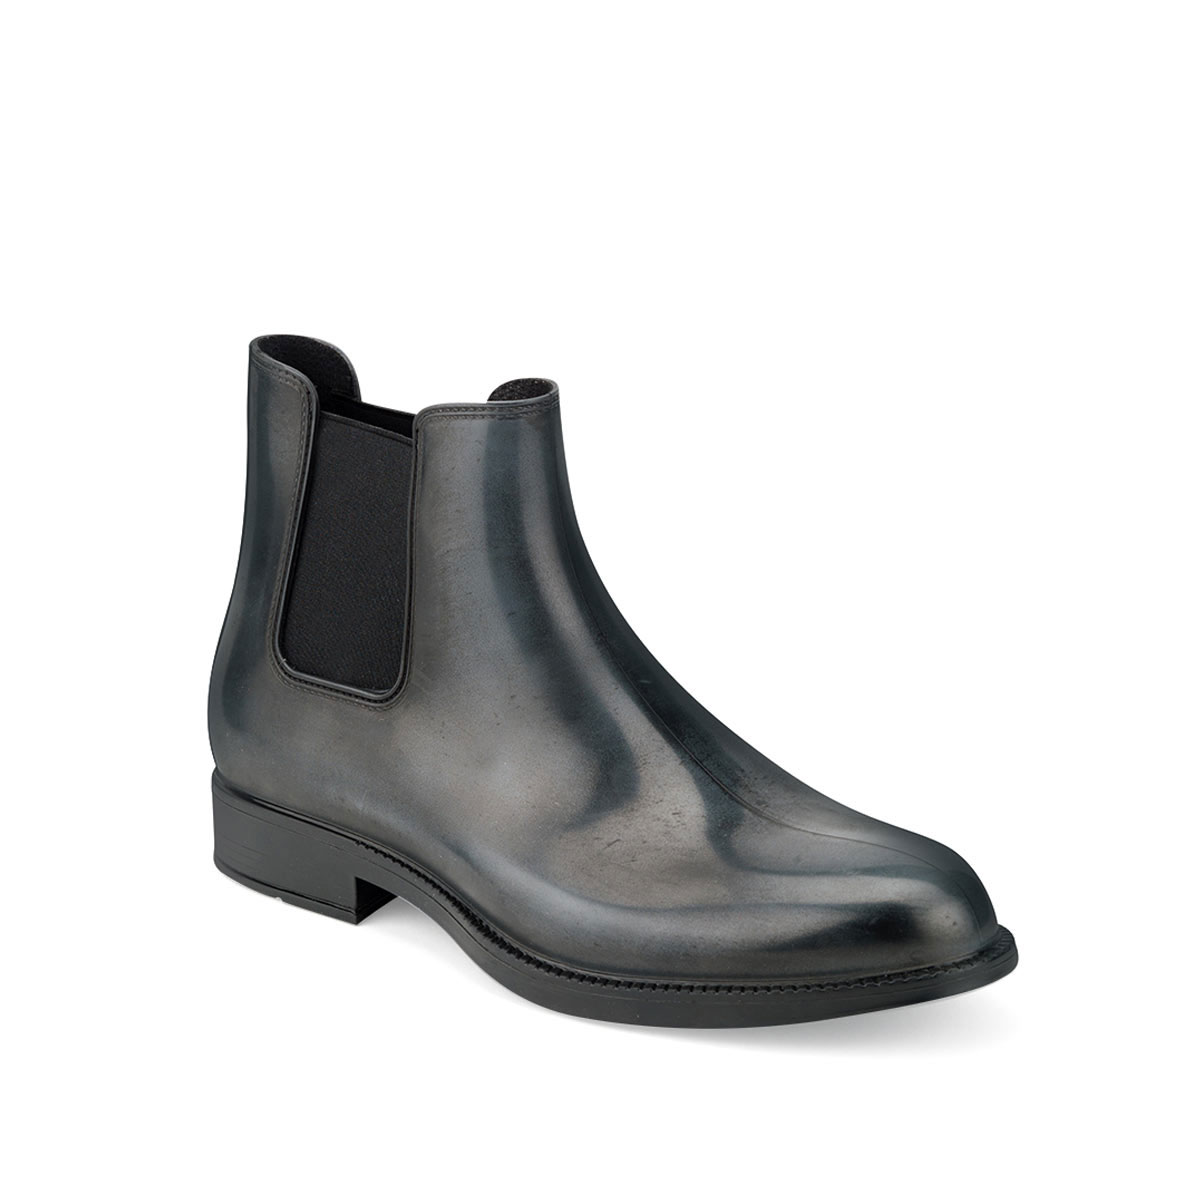 Chelsea boot in brushed effect pvc with elastic band on ankle sides and insole - gray colour